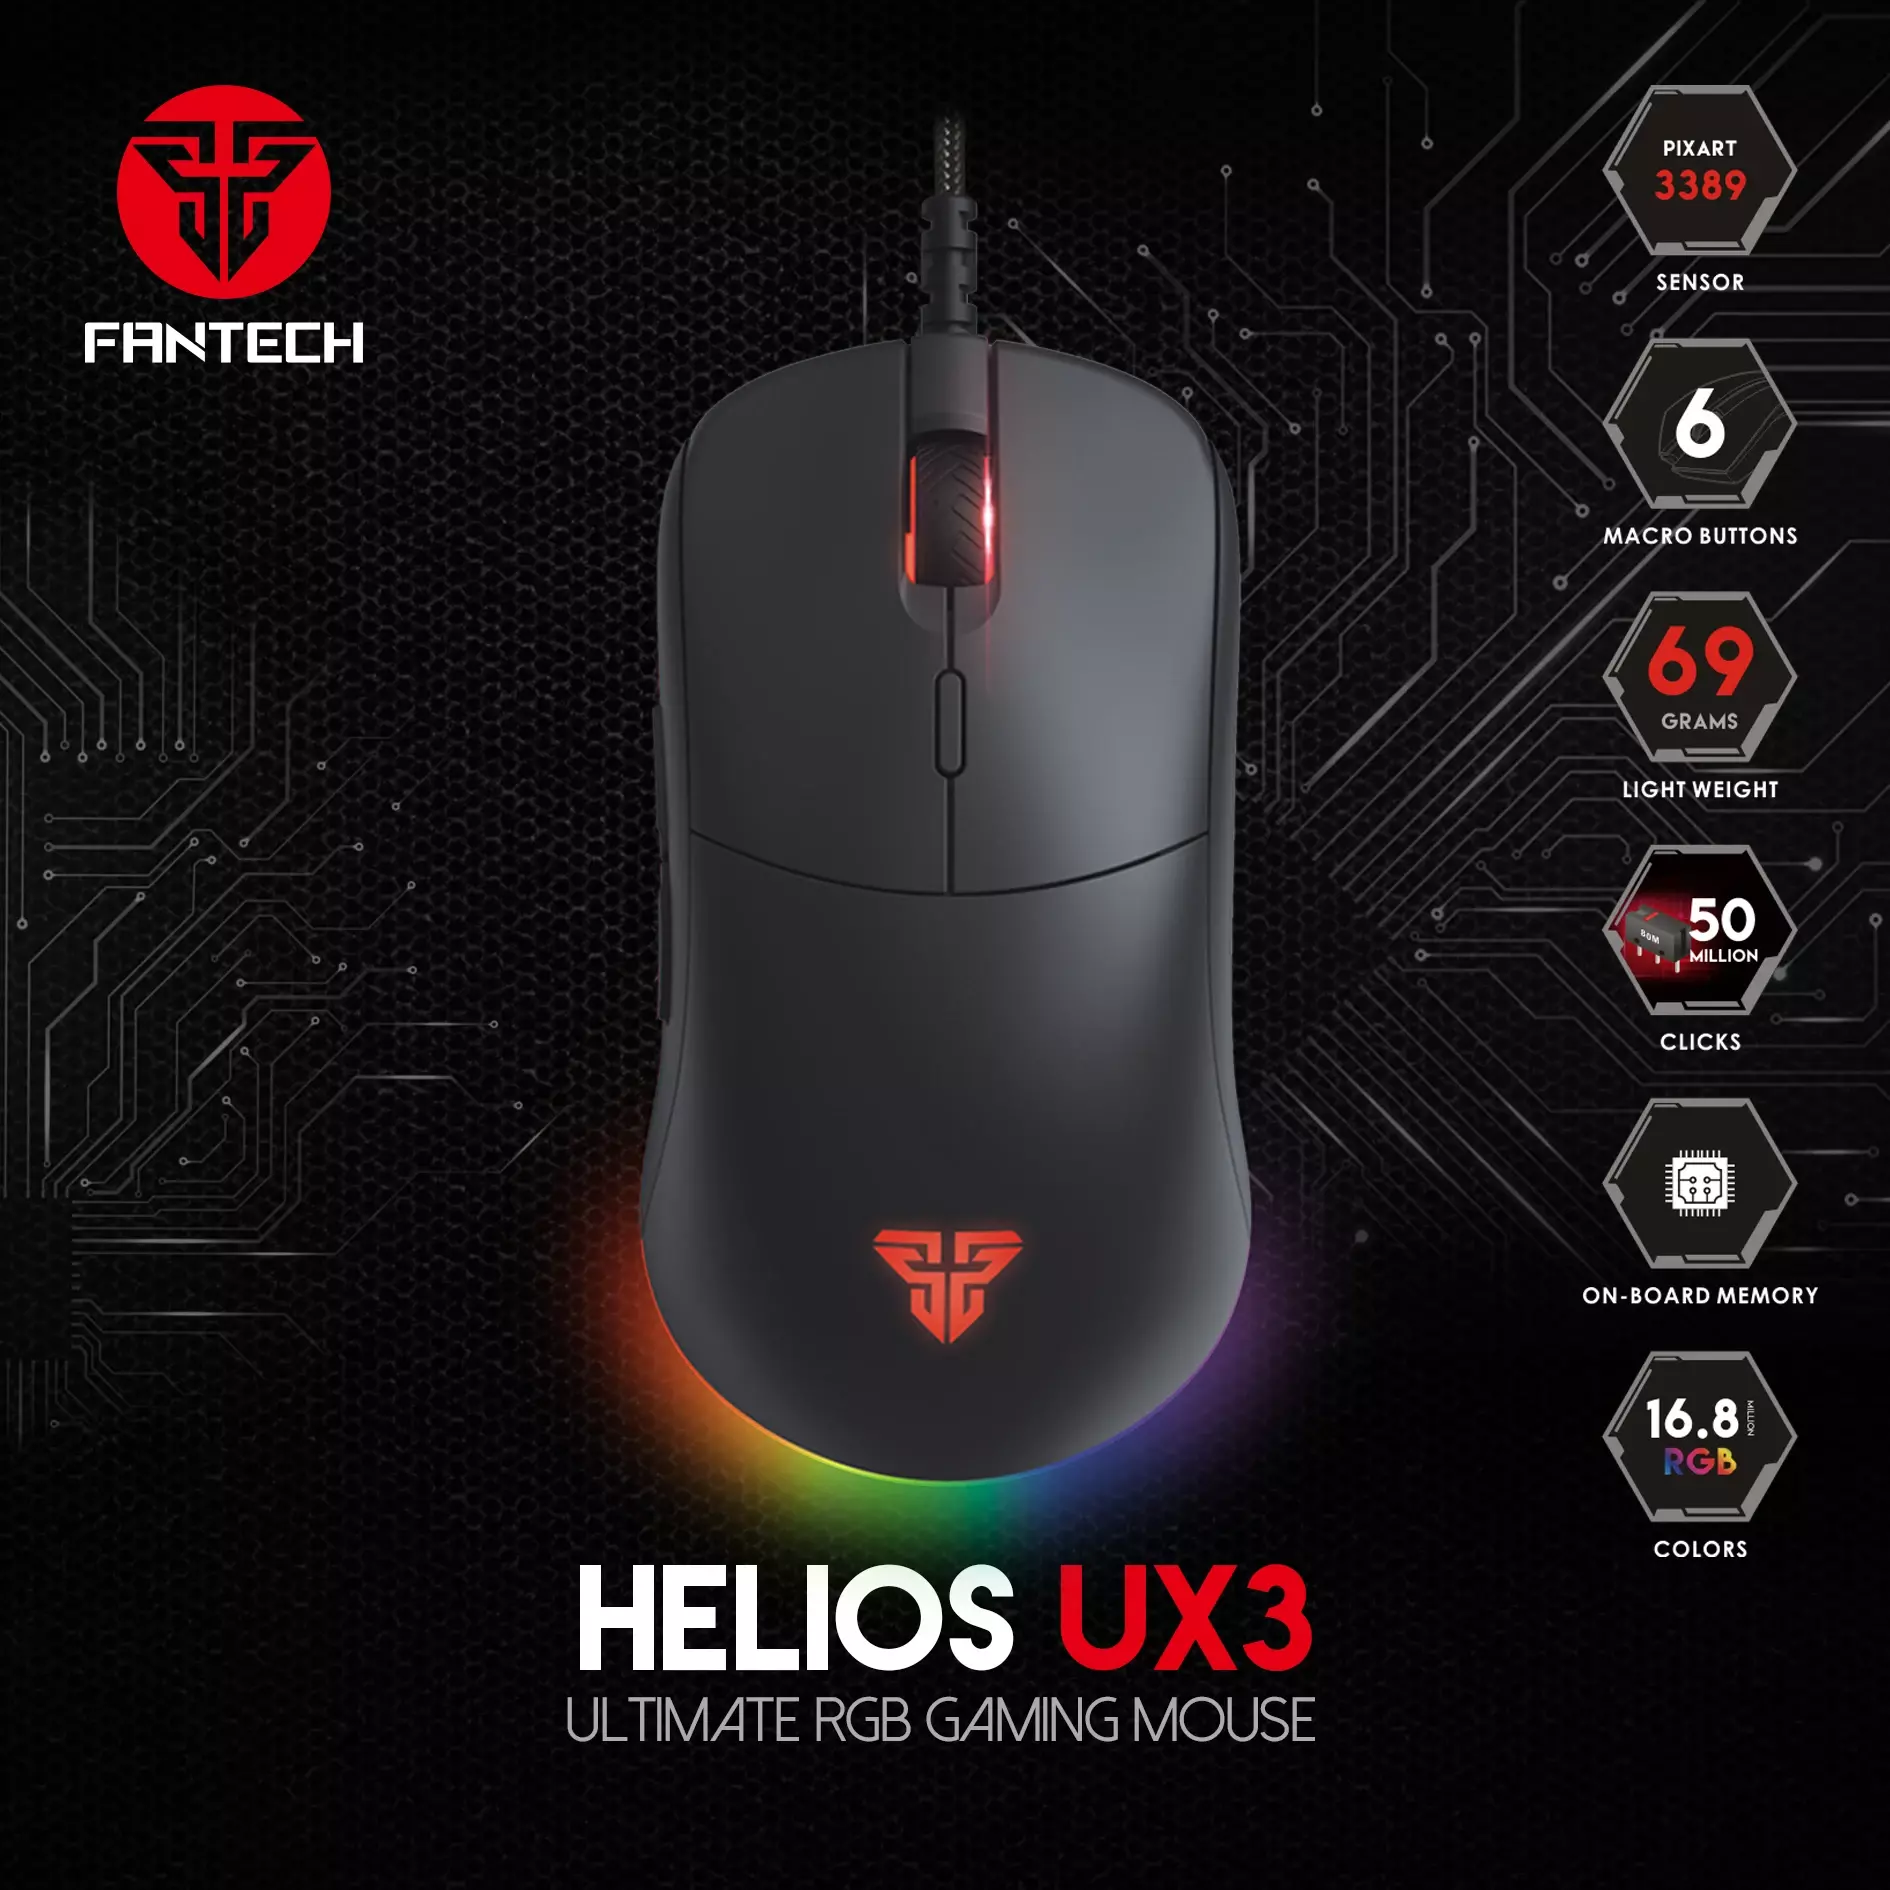 FANTECH-UX3-Gaming-Mouse-PIXART-3389-16000DPI-69G-Light-Weight-RGB-Wired-Game-Mouse-Gamer-Ergonomic